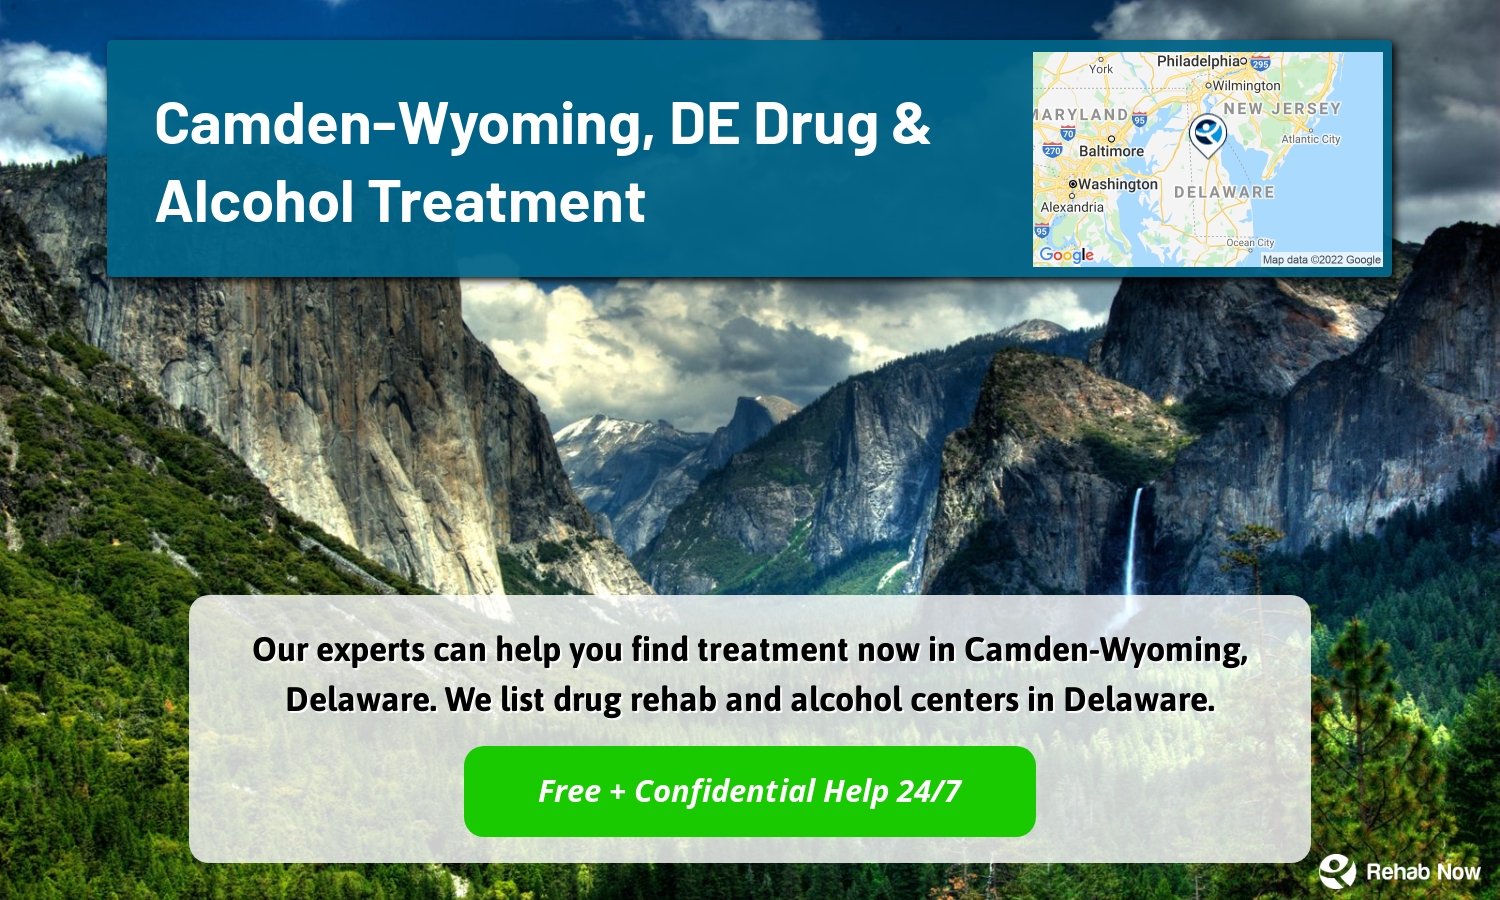 Our experts can help you find treatment now in Camden-Wyoming, Delaware. We list drug rehab and alcohol centers in Delaware.